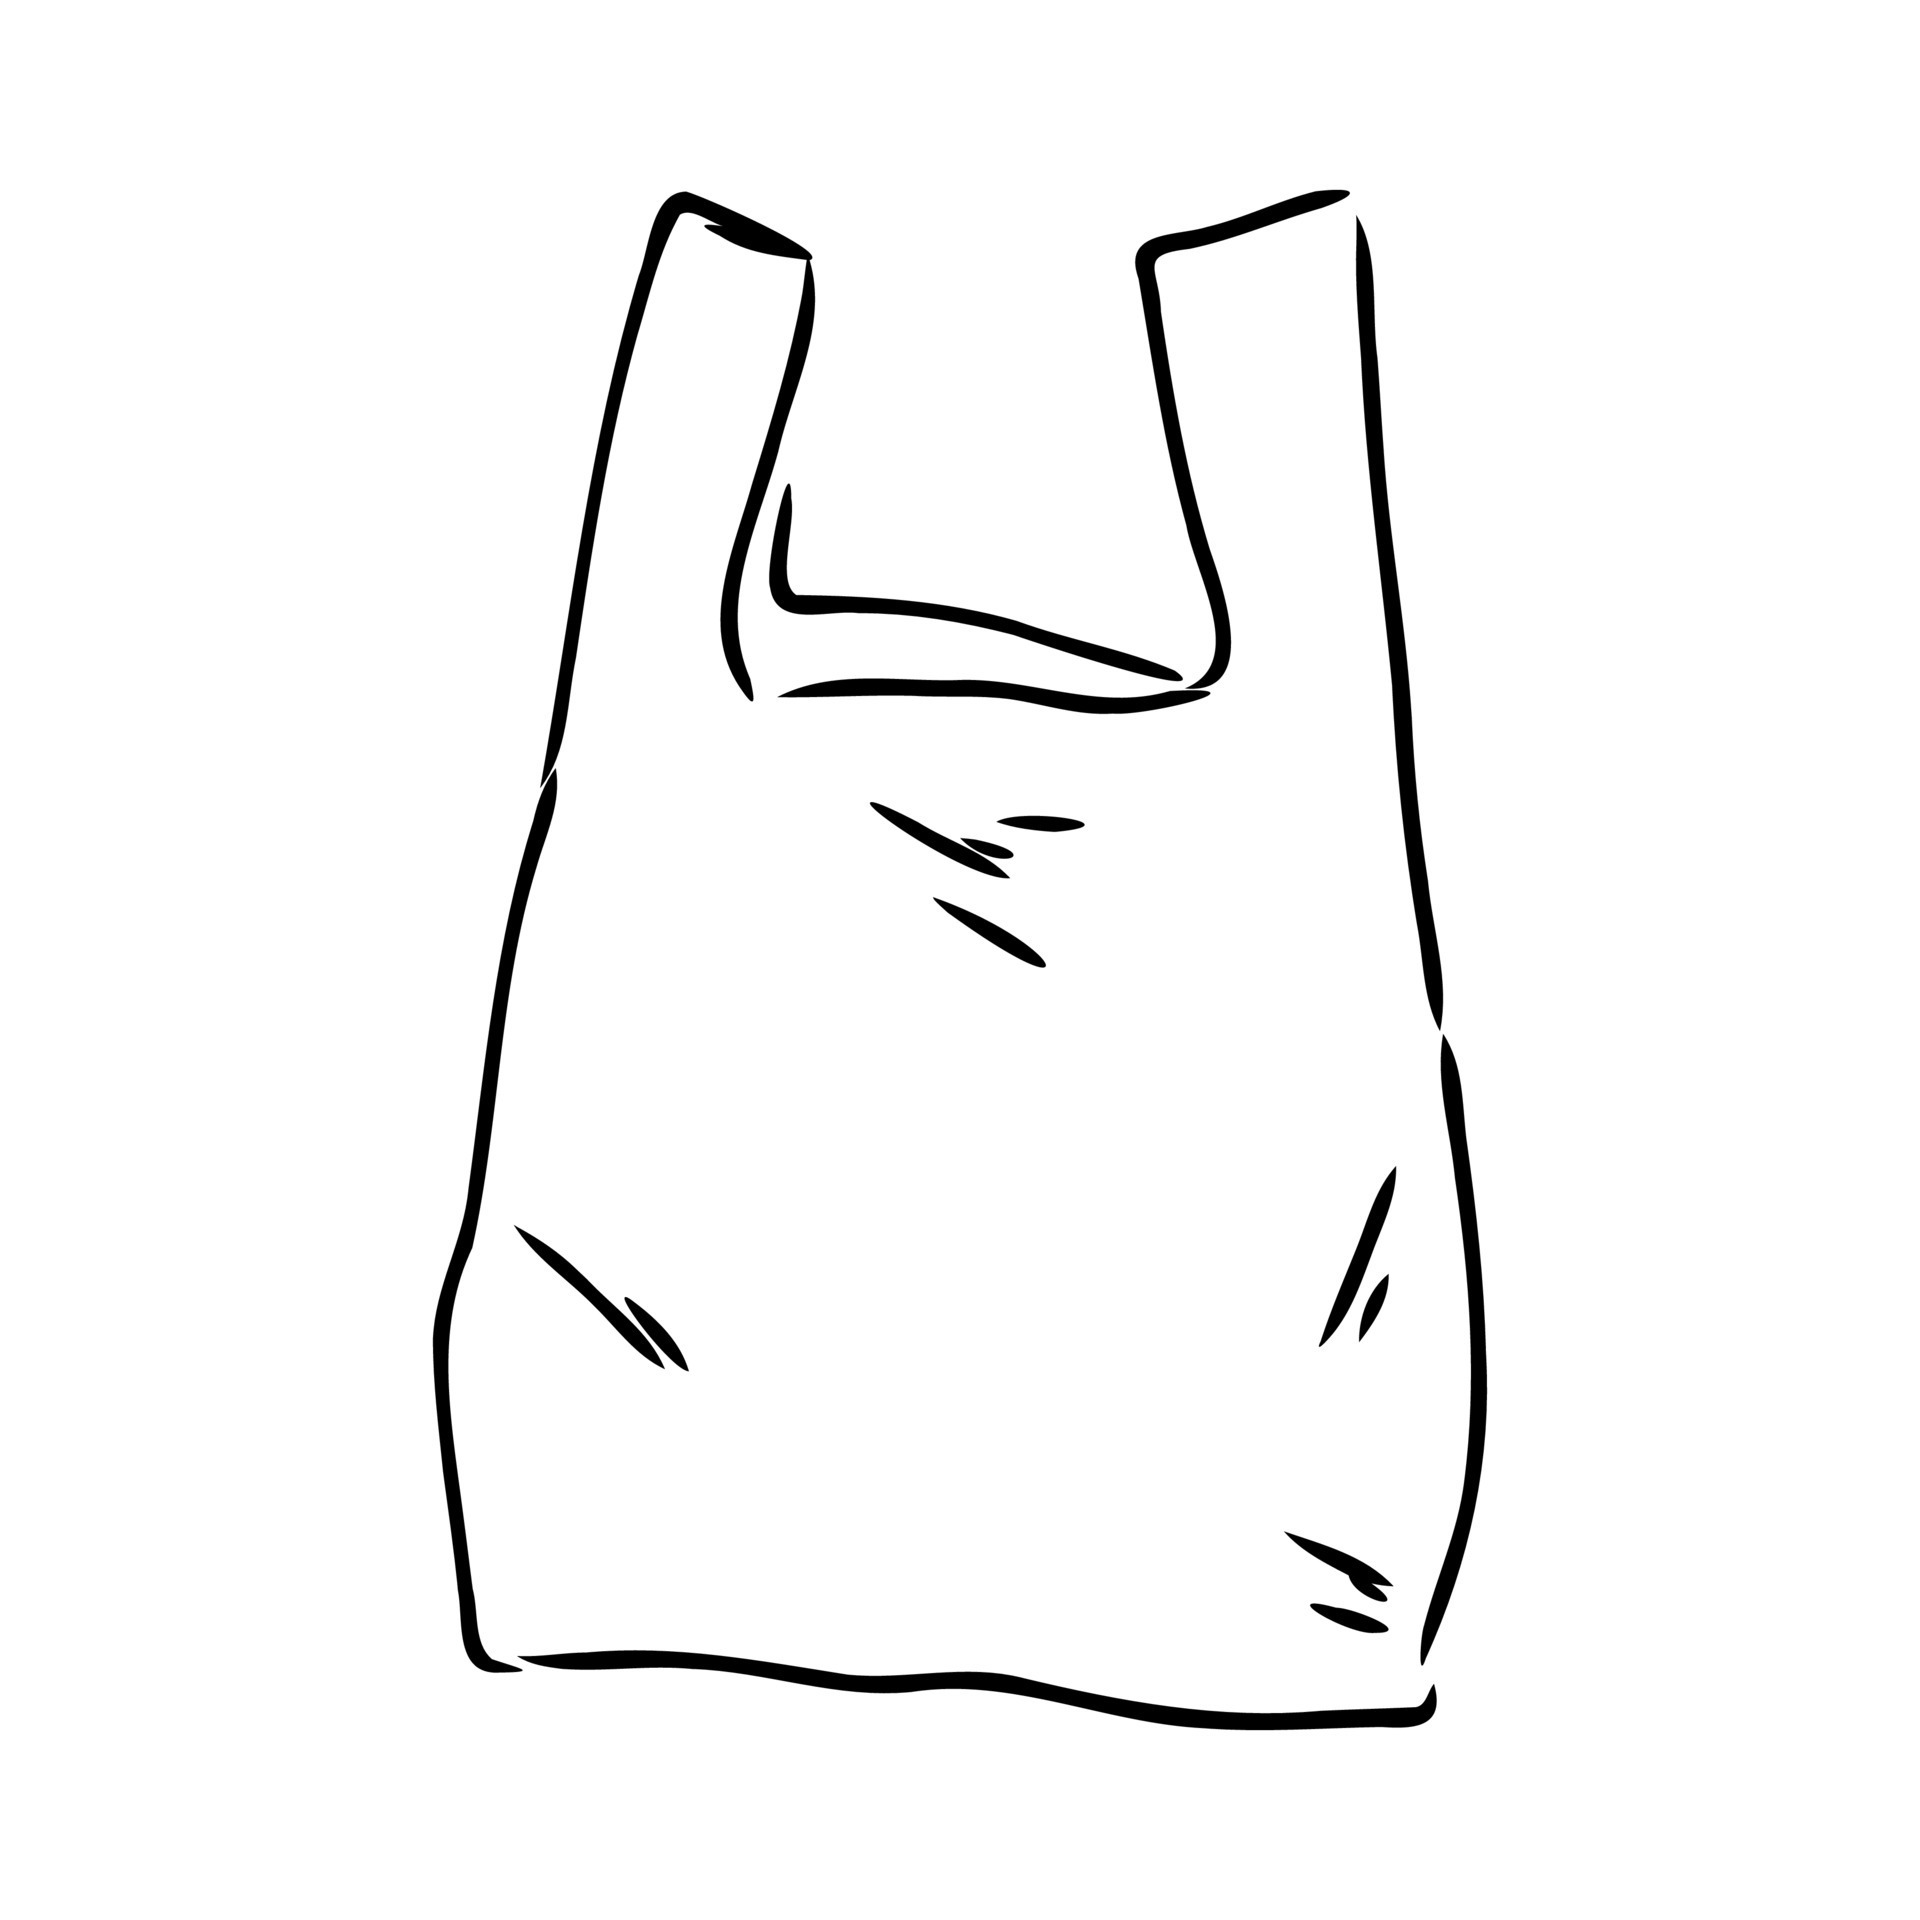 A Thumbs-down Symbol On A Drawing Of A Plastic Shopping - Plastic Bag Black  And White Transparent PNG - 420x420 - Free Download on NicePNG